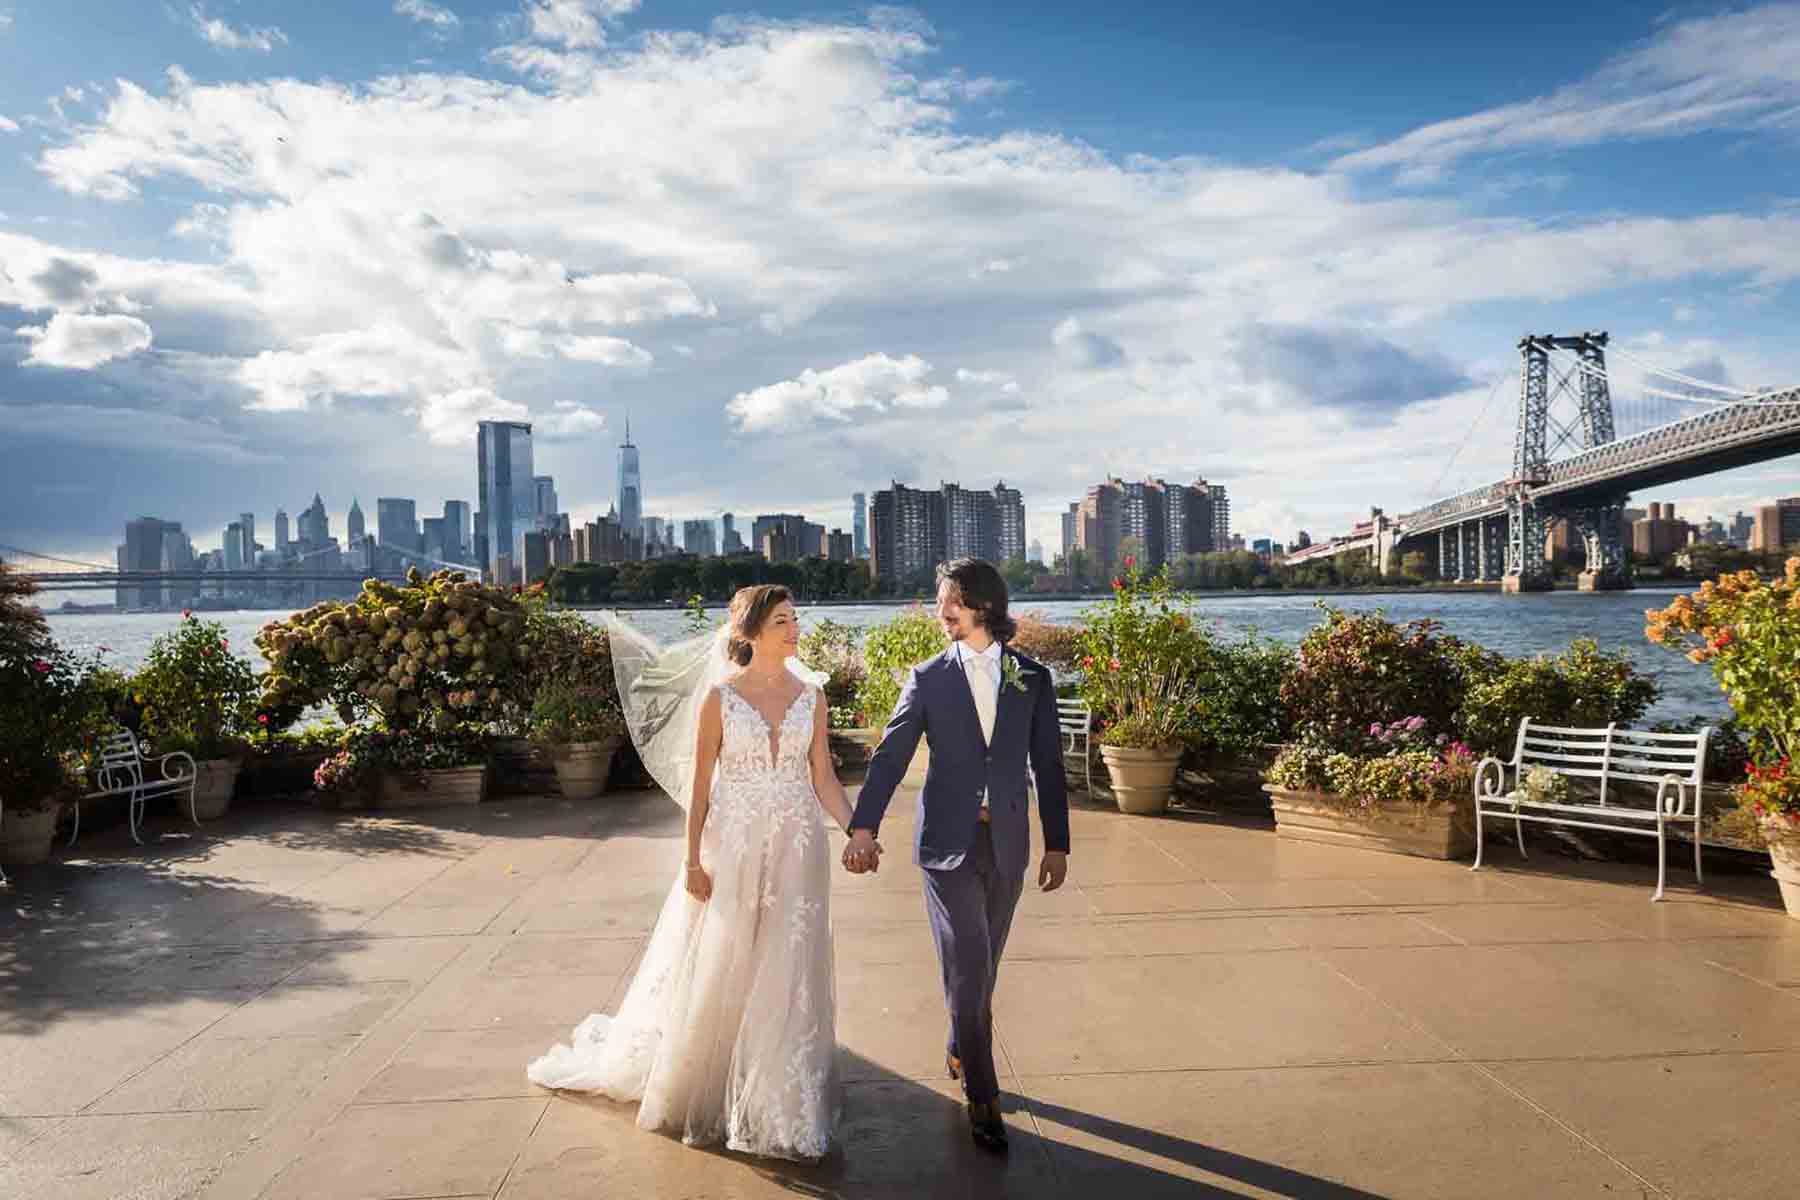 Bride and groom holding hands and walking on patio with NYC skyline in background